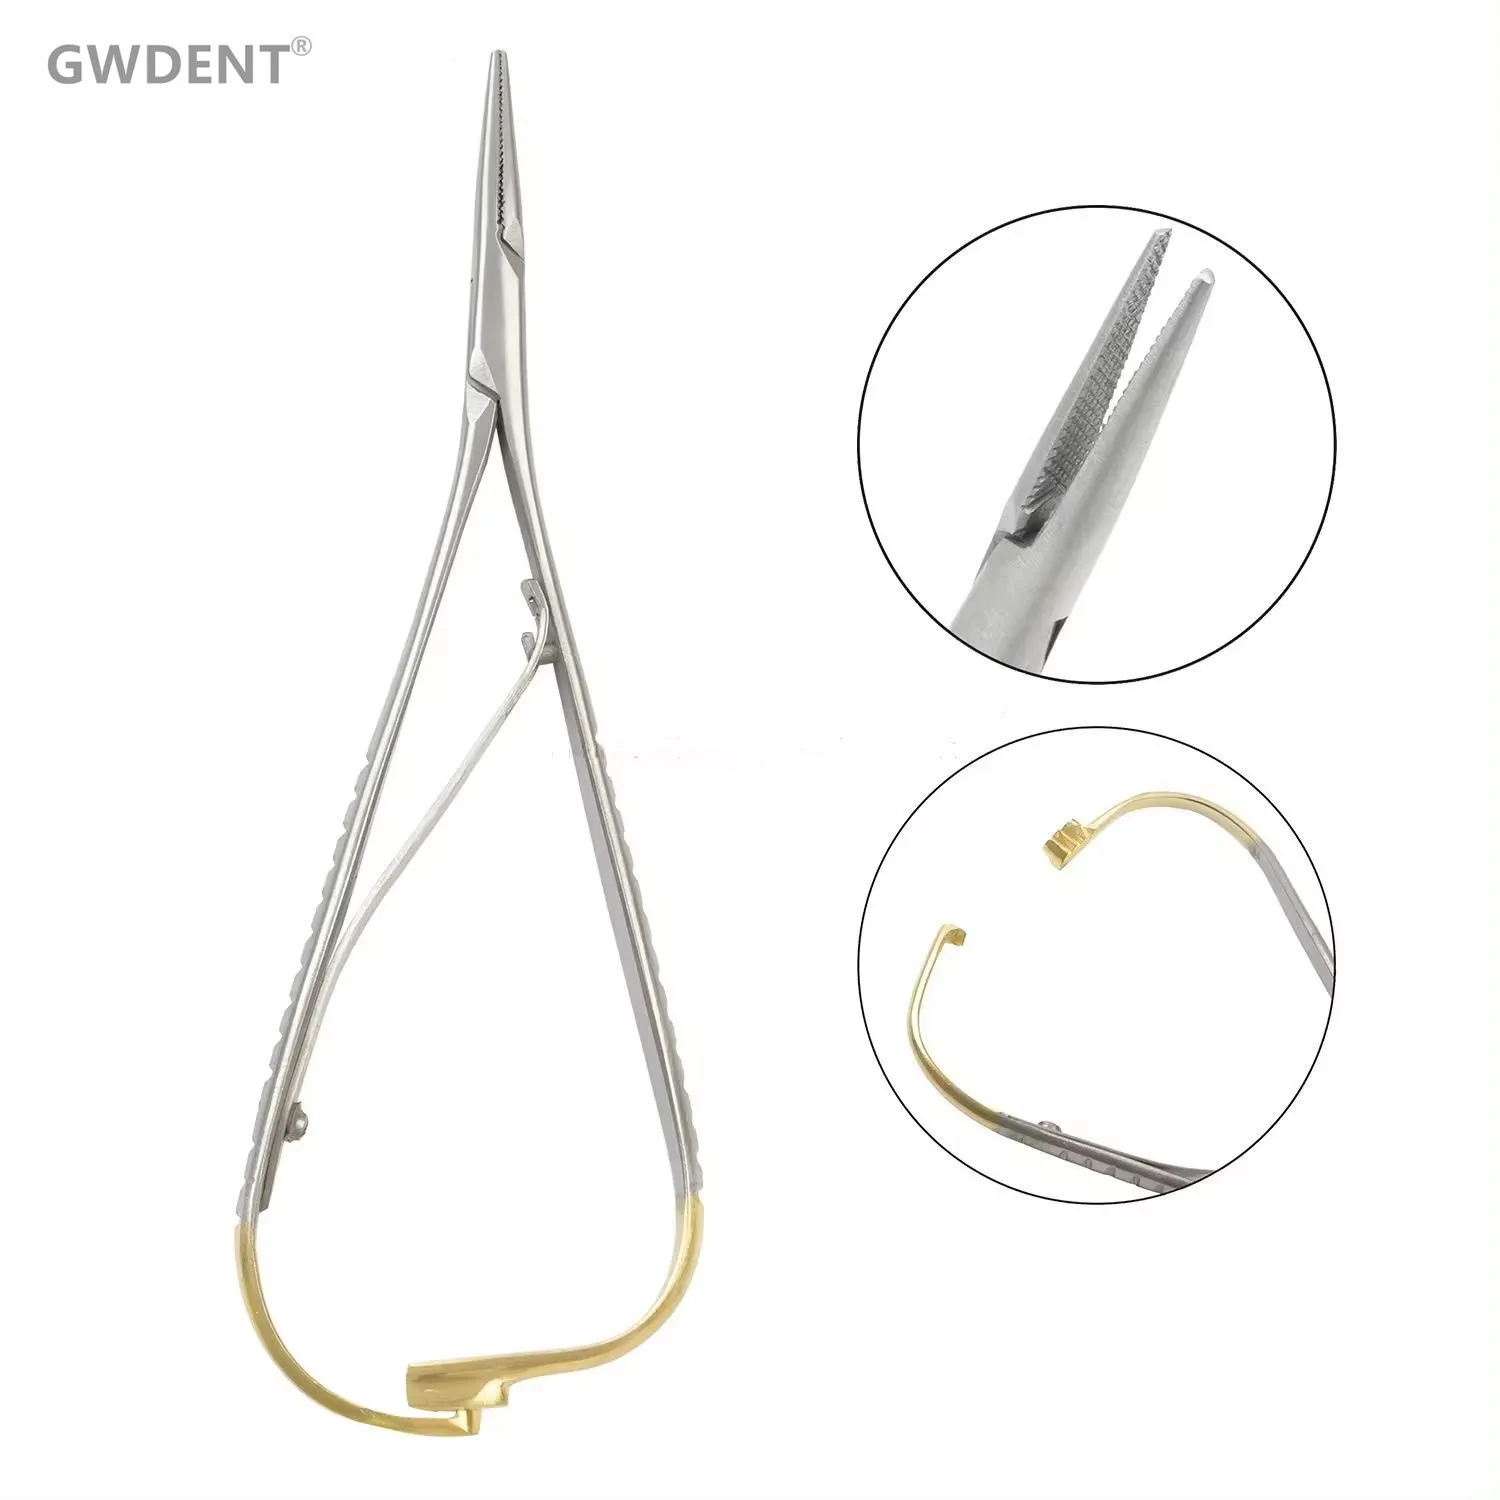 

1Pcs GWDENT Dental Needle Holder Tweezers Stainless Steel Surgical Orthodontic Plier Forceps 14cm Gold Handle Dentist Tool